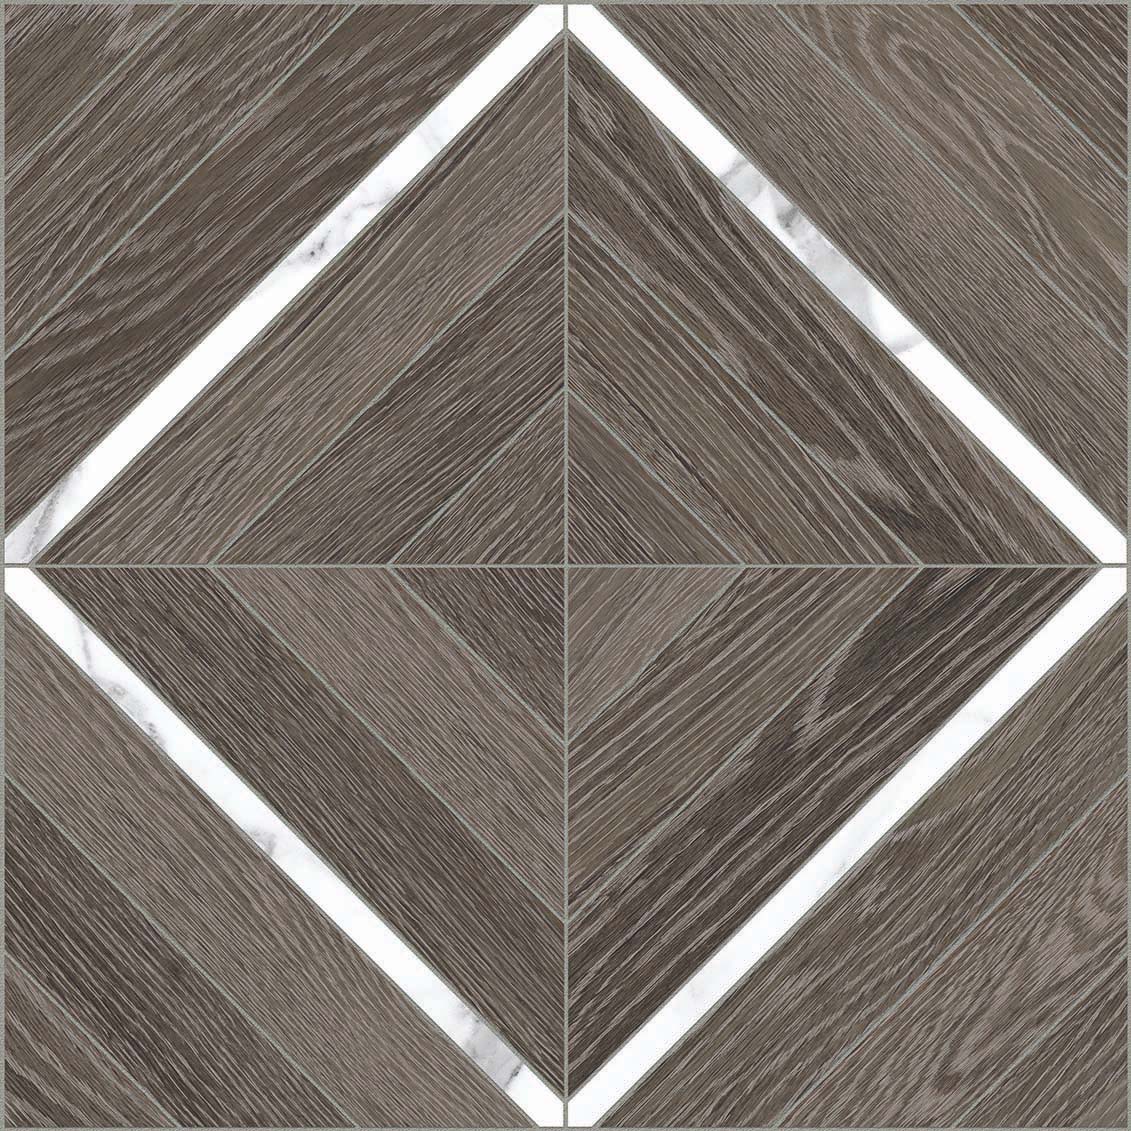 Anatolia Aspen 16 in. x 16 in. HD Porcelain Marquetry Mosaics - Sequoia with Statuario